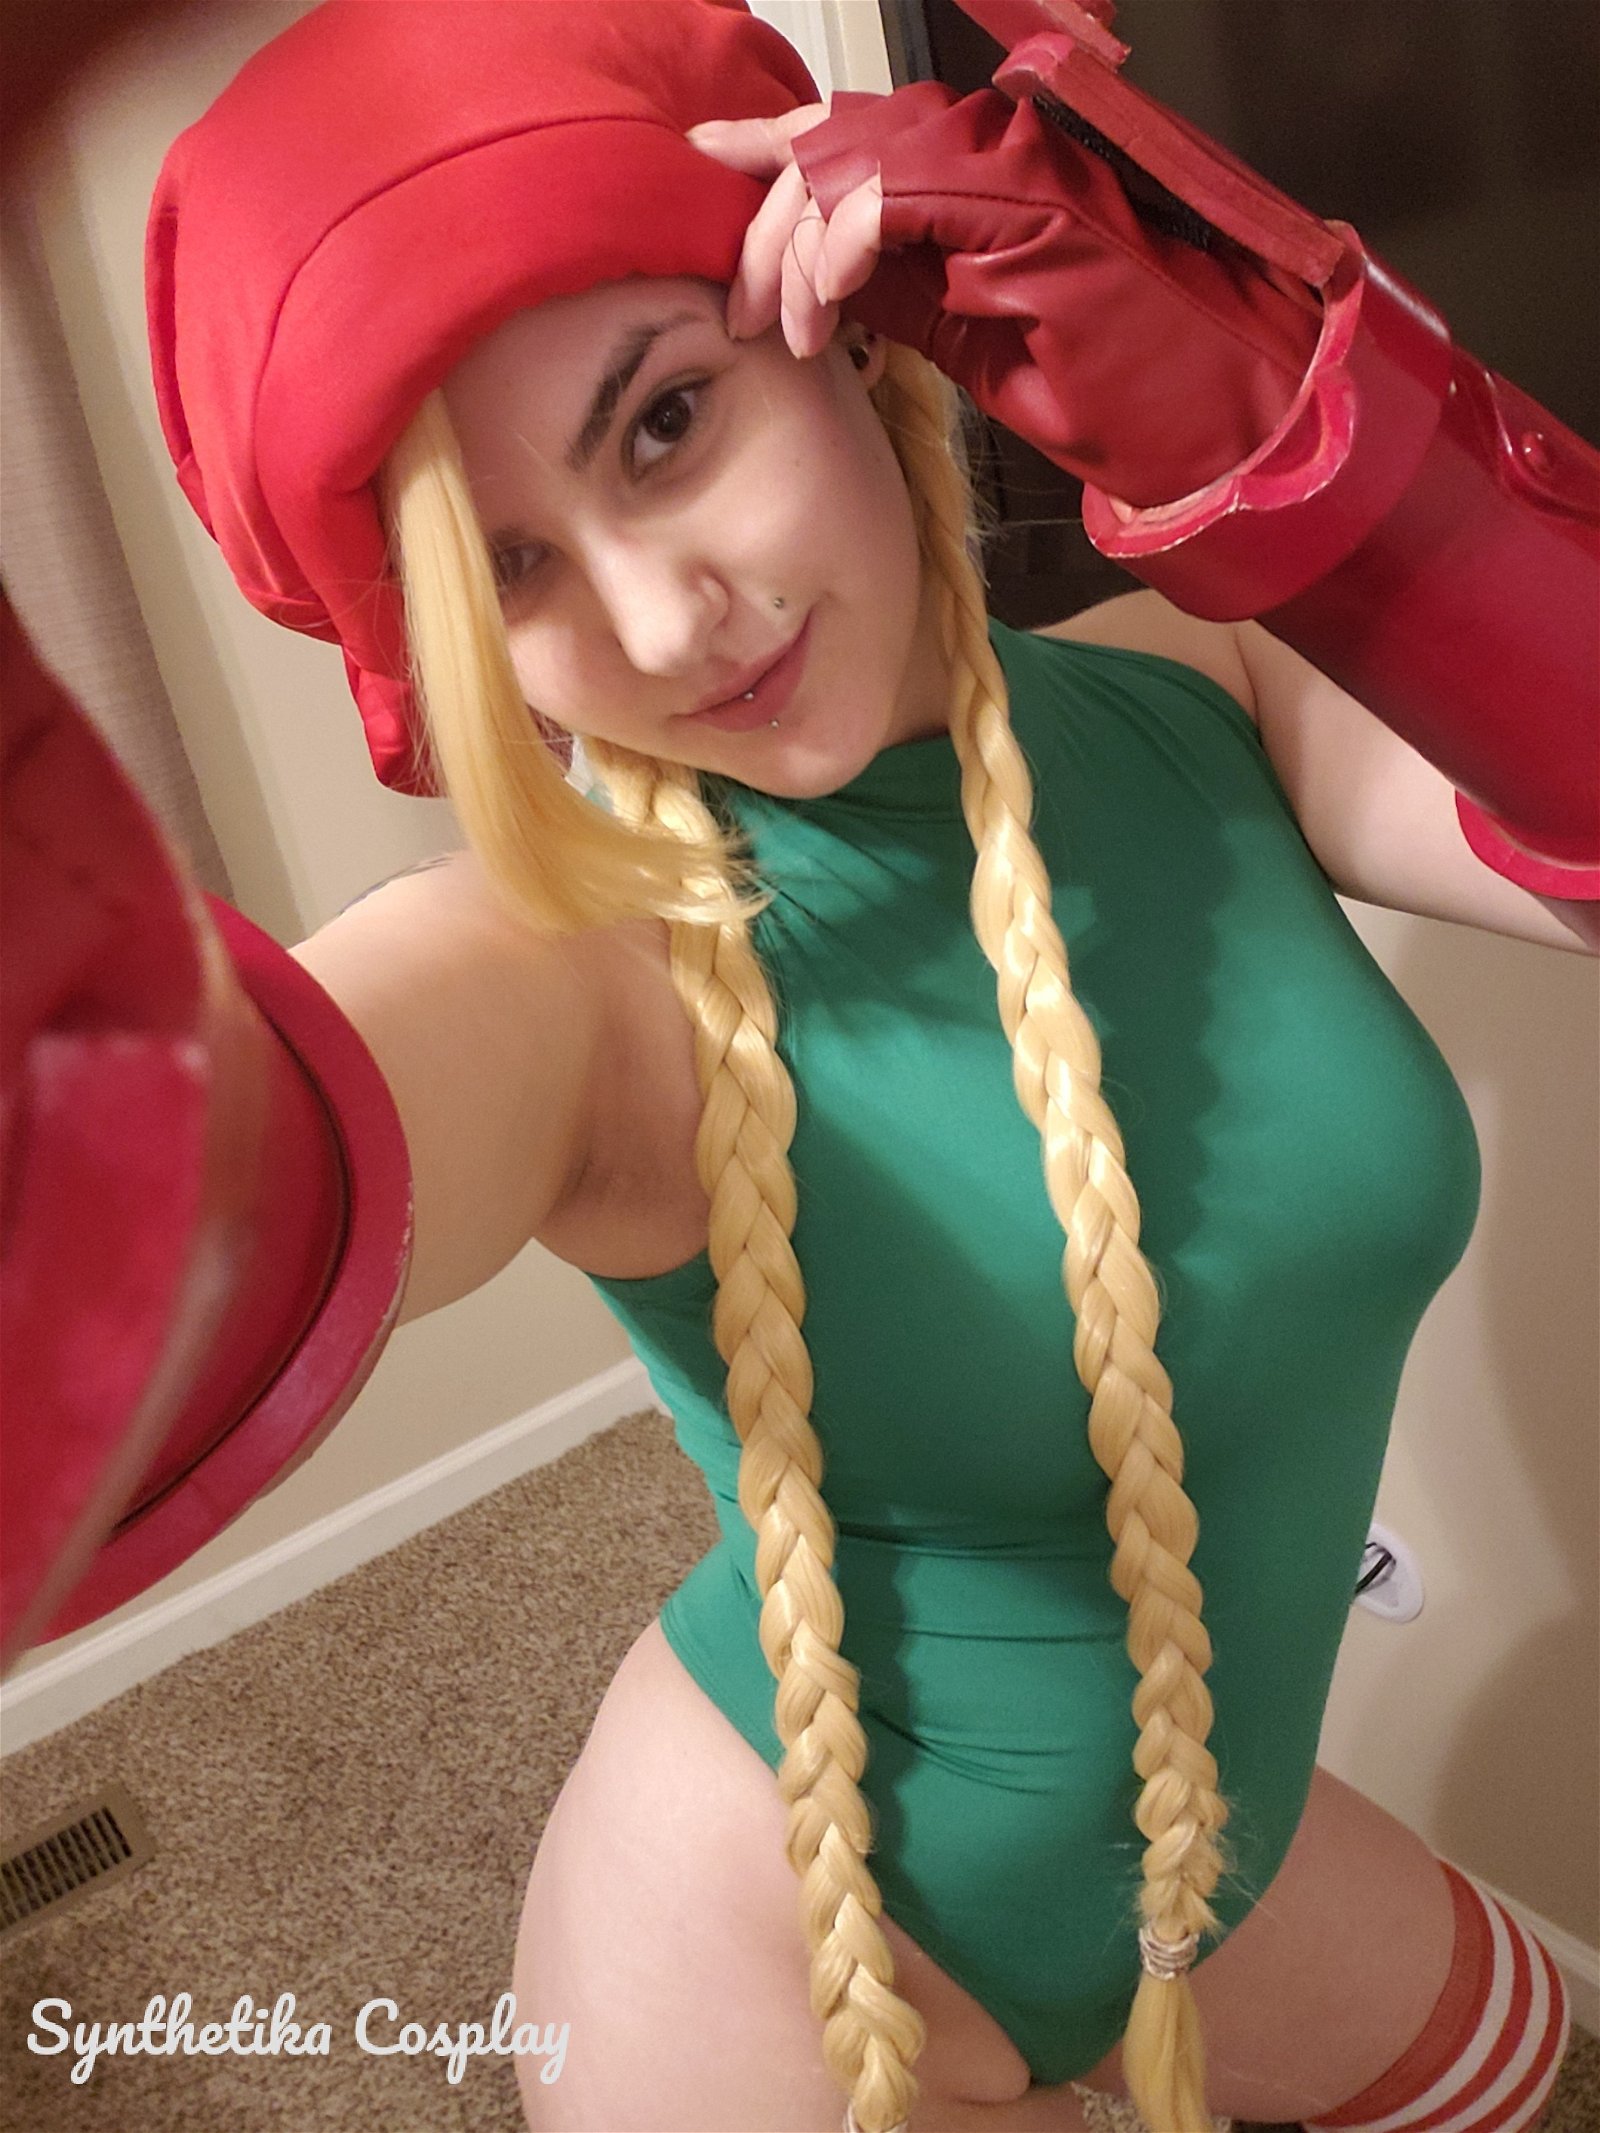 Photo by SynthetikaCosplay with the username @SynthetikaCosplay, who is a star user,  December 13, 2018 at 3:24 AM. The post is about the topic Cosplay and the text says 'Would you kiss Christmas elf Cammy underneath the mistletoe?
🍭🍭🍭🍭'